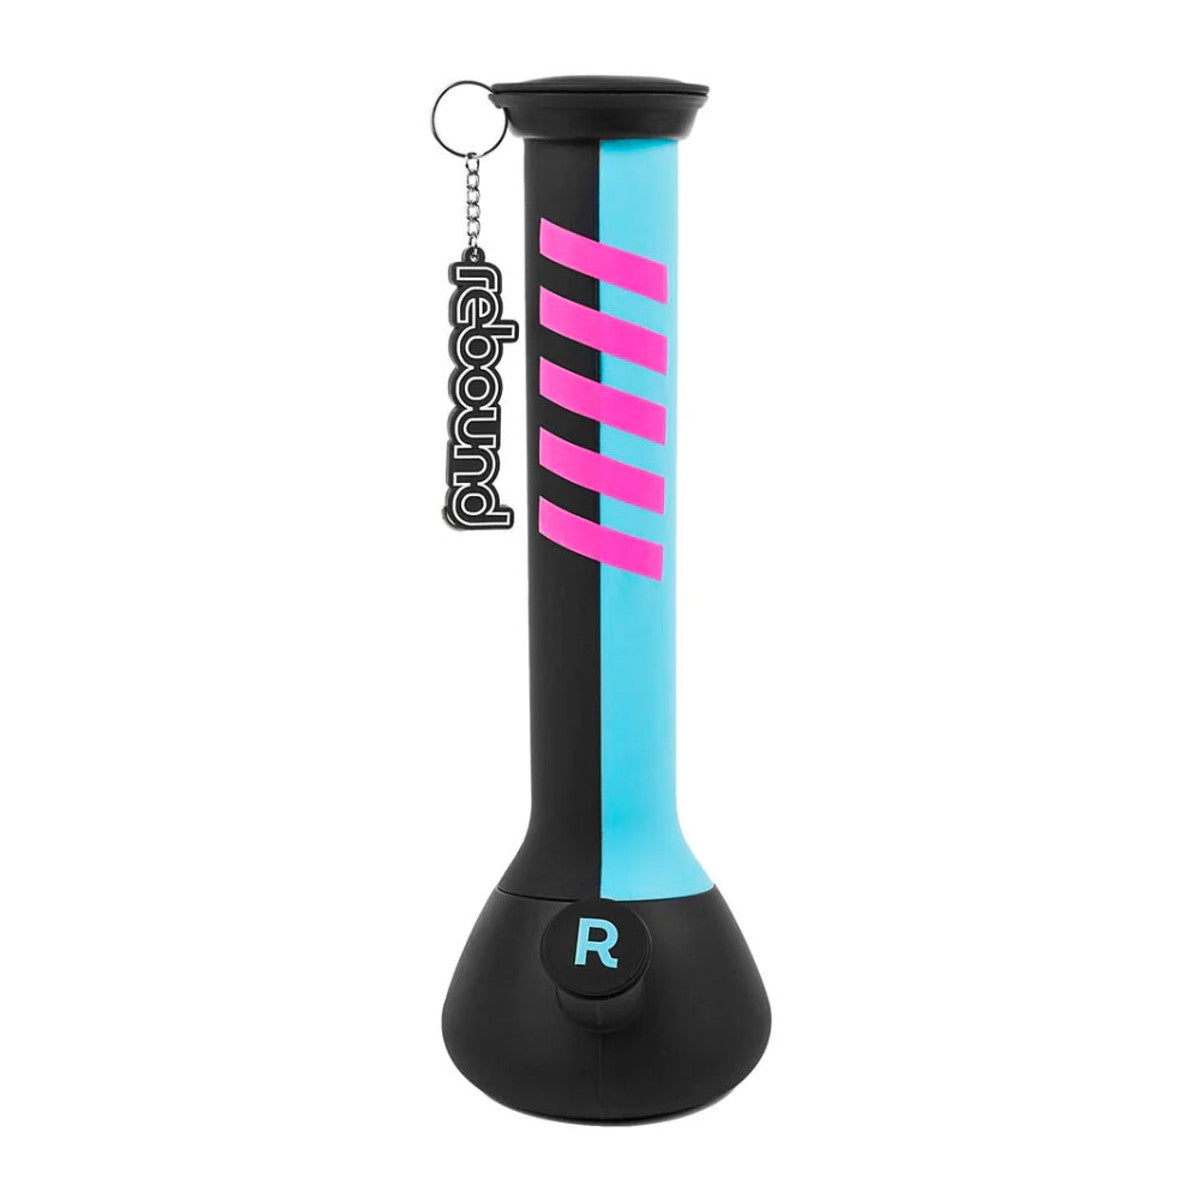 Rebound line up of silicone bongs and pipes are the shatterproof alternative to traditional glass. Whether its’ at home or on-the-go, Rebound’s unbreakable and eye catching designs will ensure your seshes are enjoyed to the fullest. Meet Rebound Edition 1 Waterpipes. Measuring 14" tall, Rebound water pipes are made from durable silicone making them shatterproof.